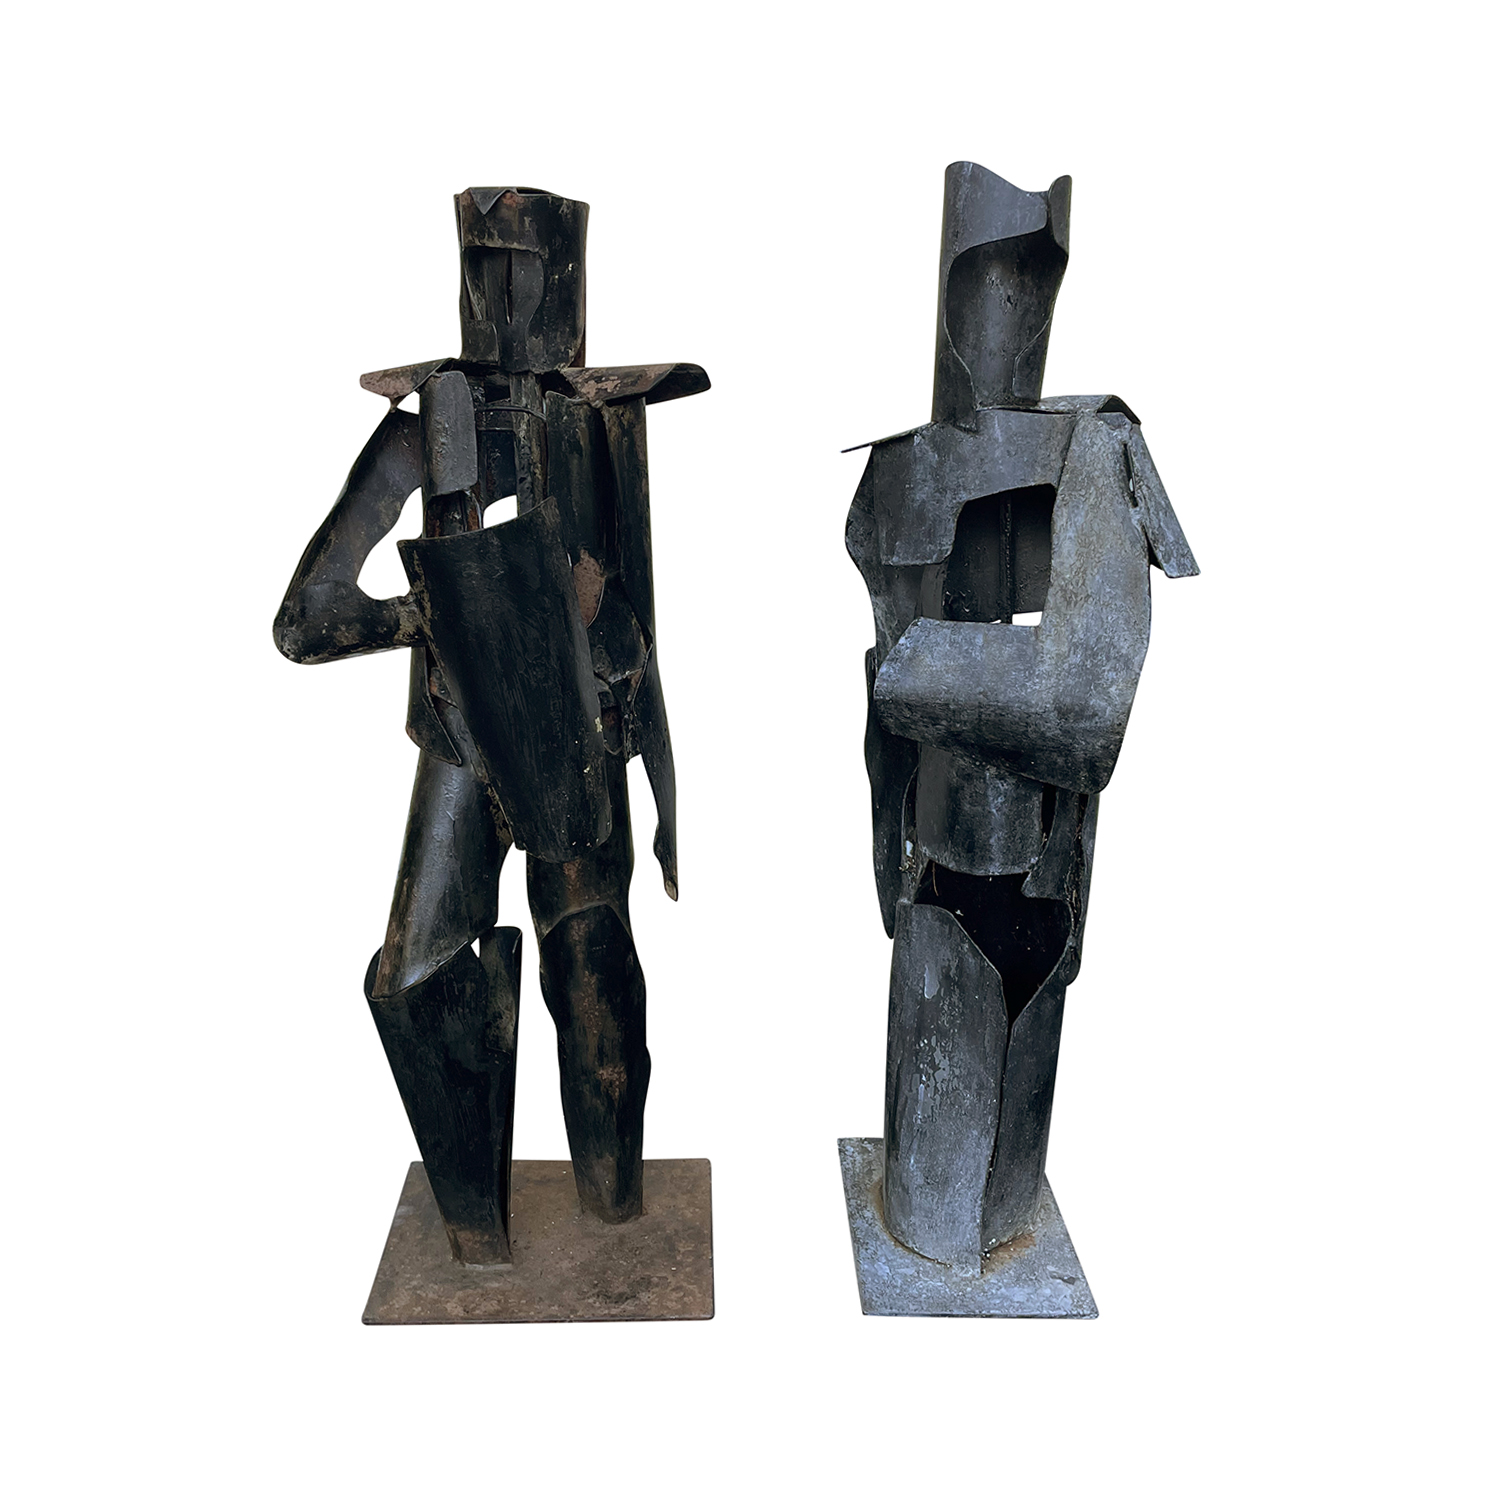 20th Century Grey English Pair of Steel Sculptures by June Barrington-Ward